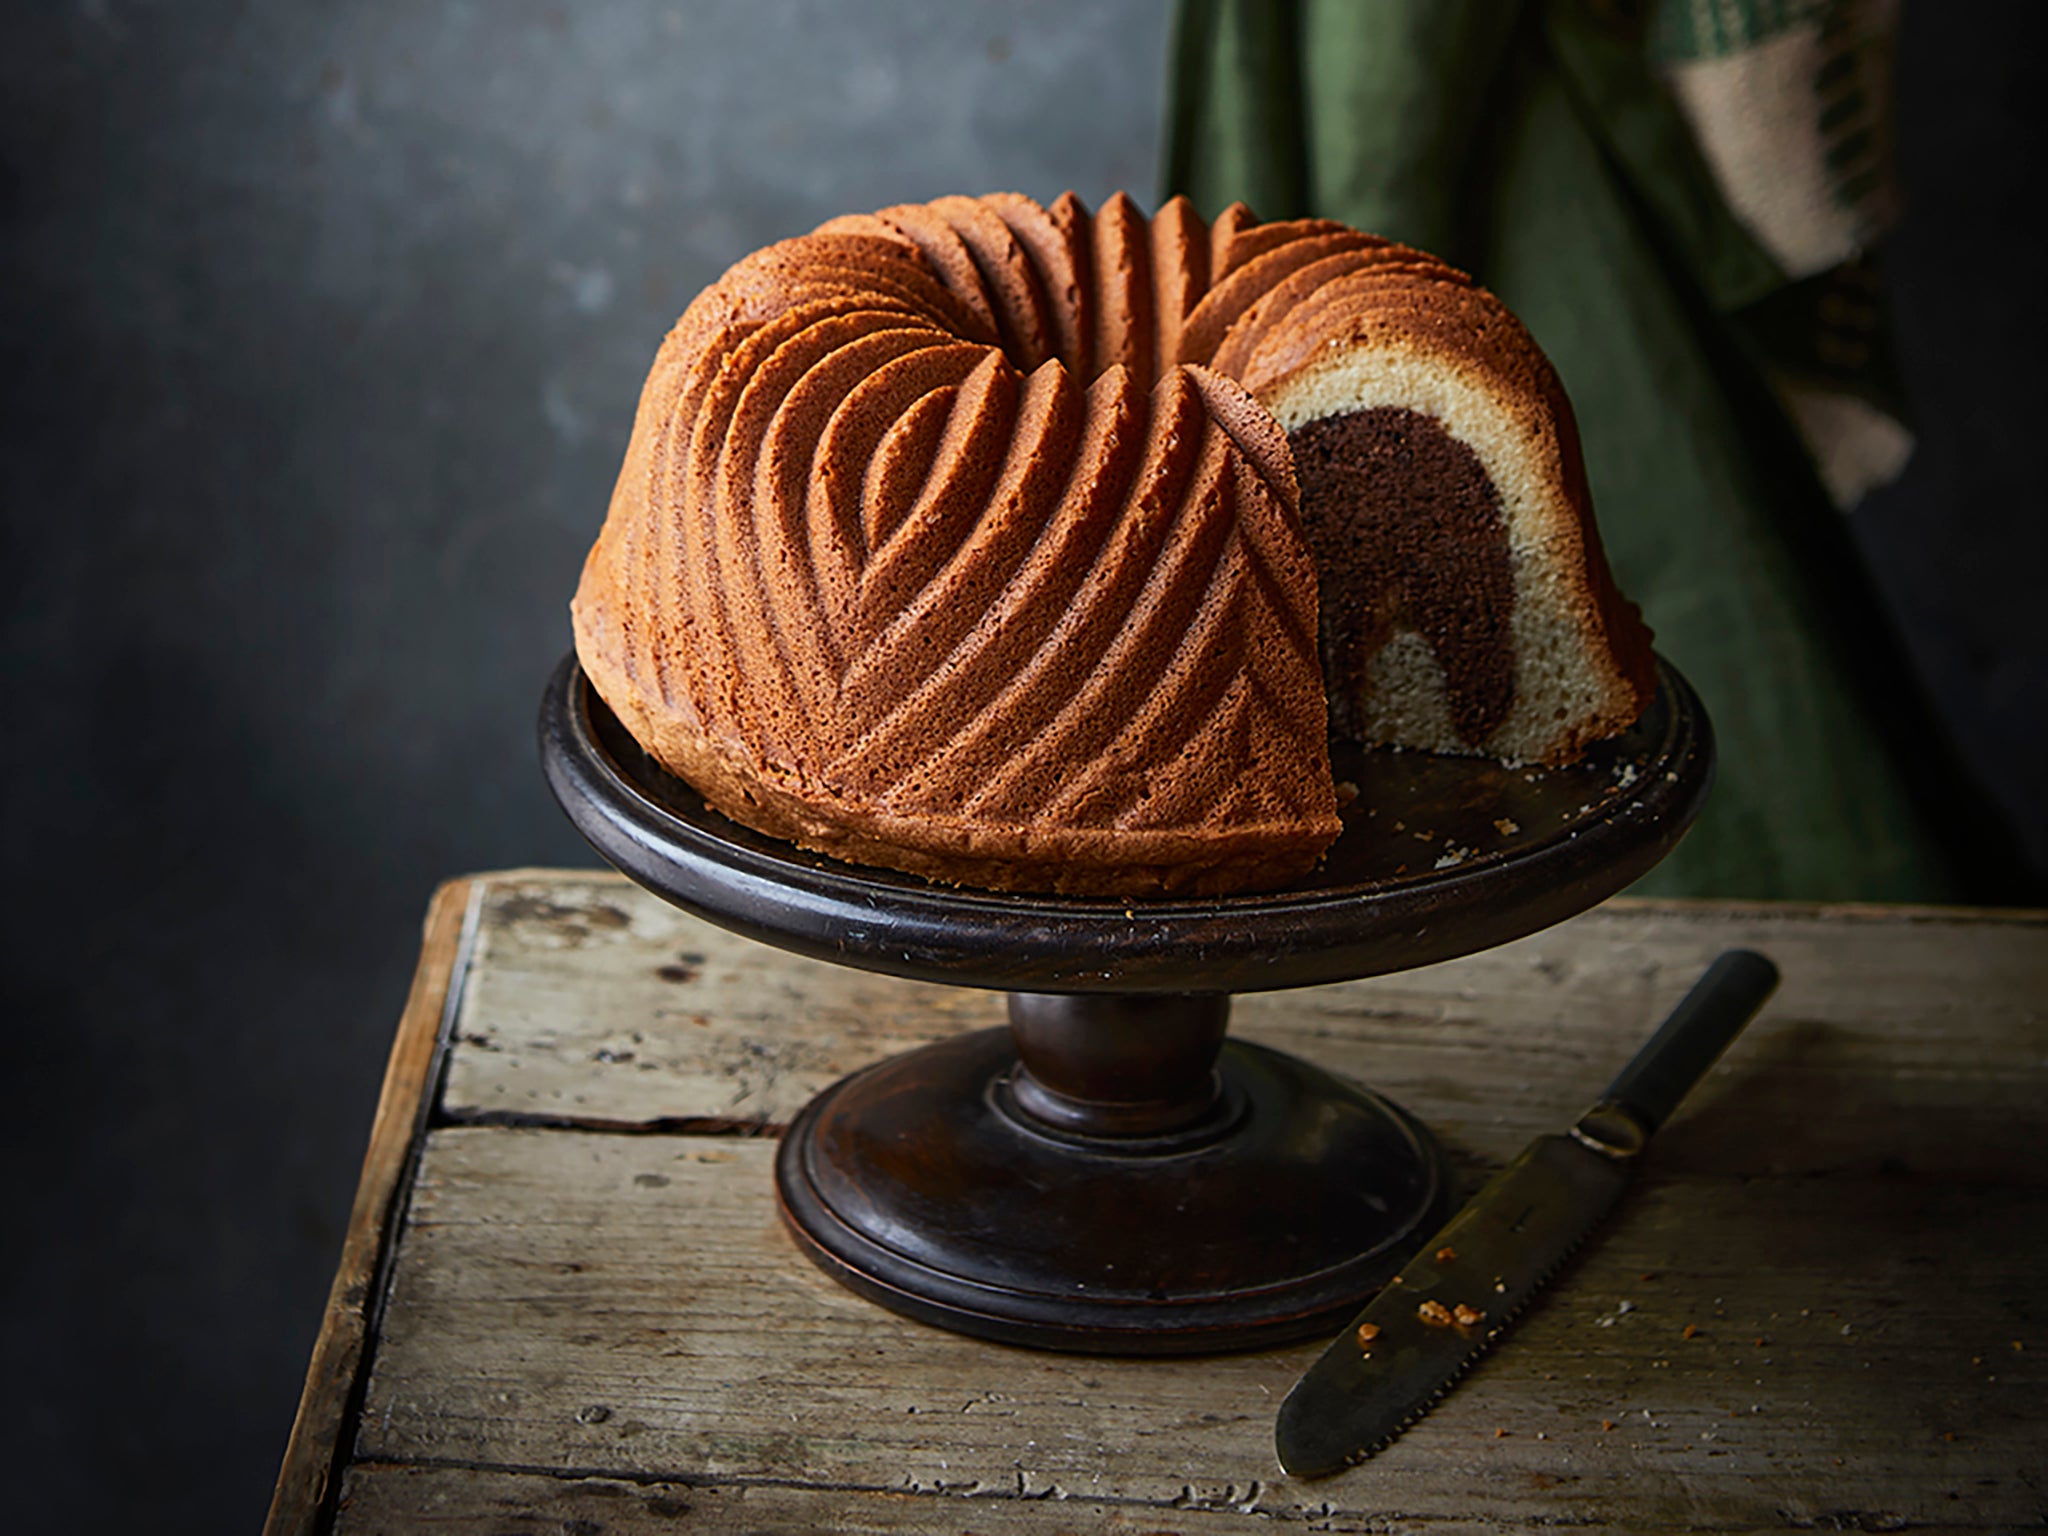 German Marble Cake (Marmor Kuchen) - A Feast For The Eyes